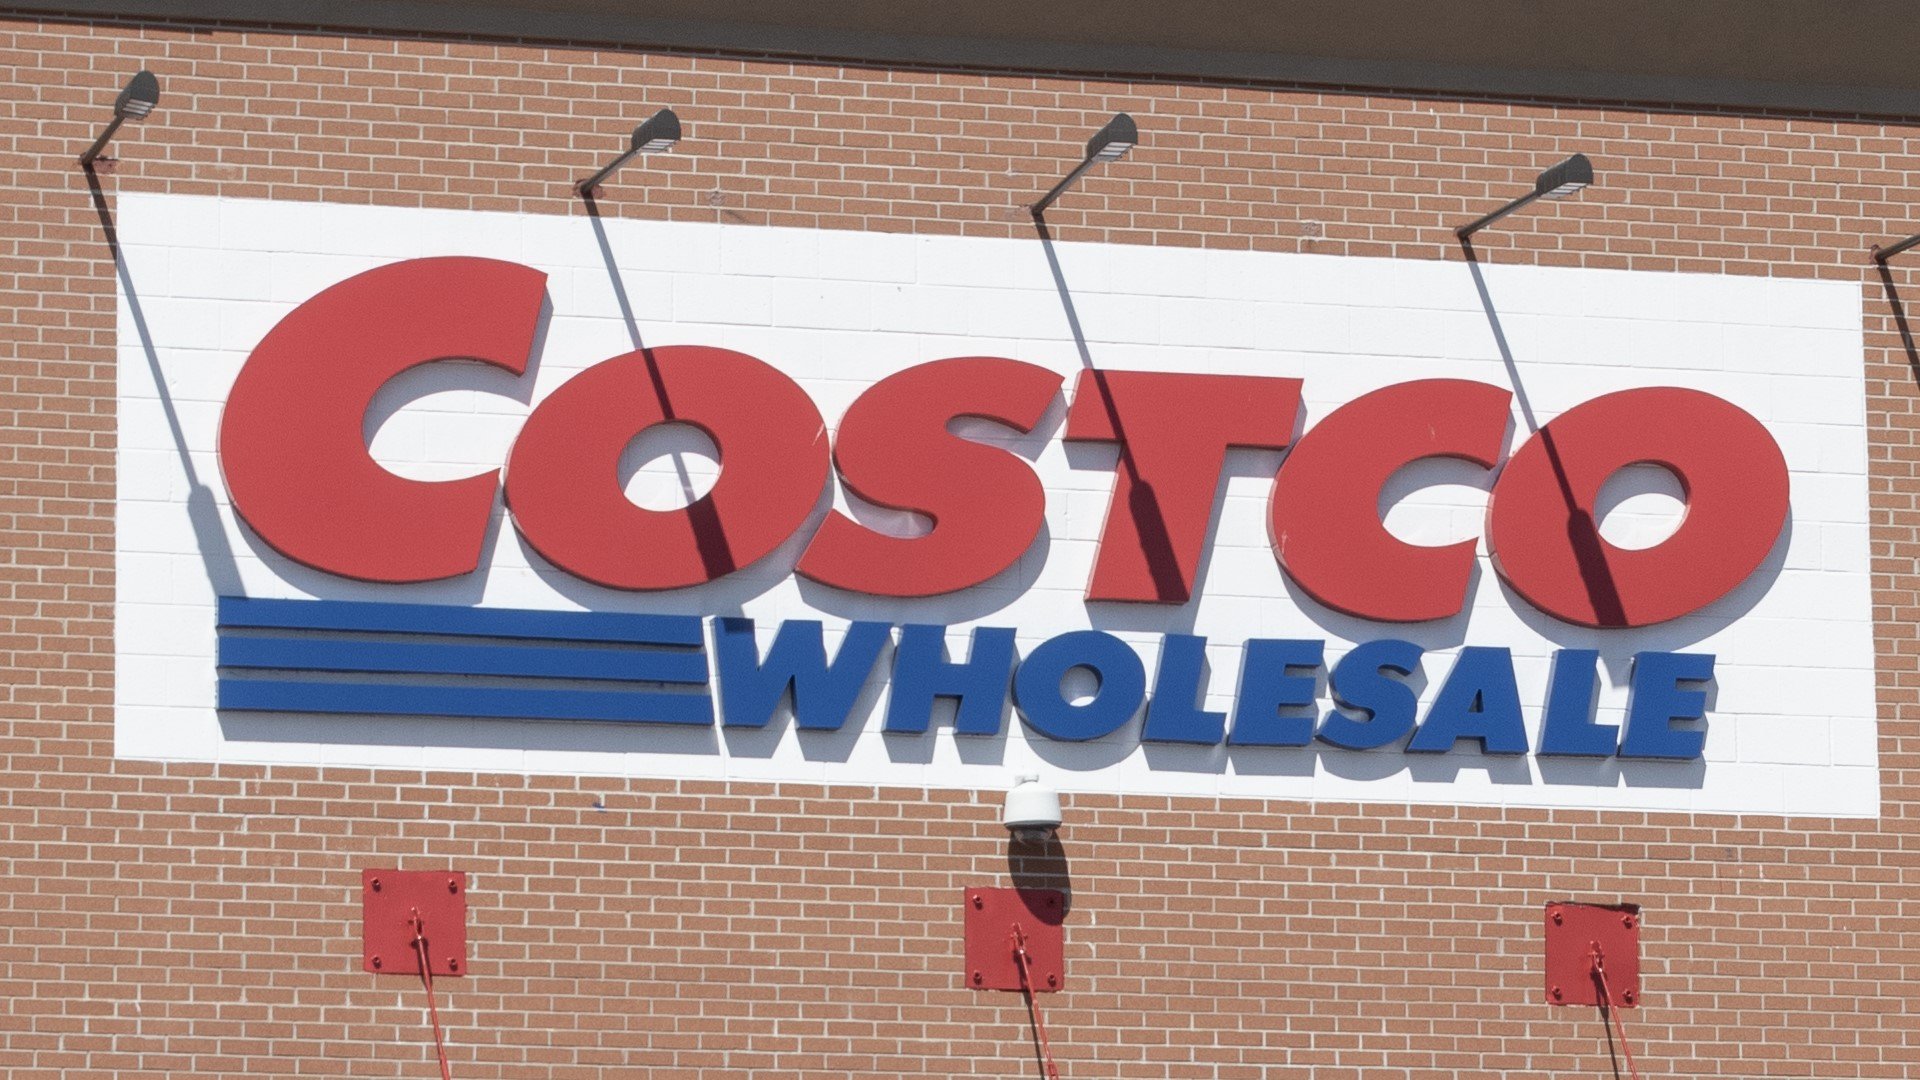 20 Items That Are Always Cheaper at Costco